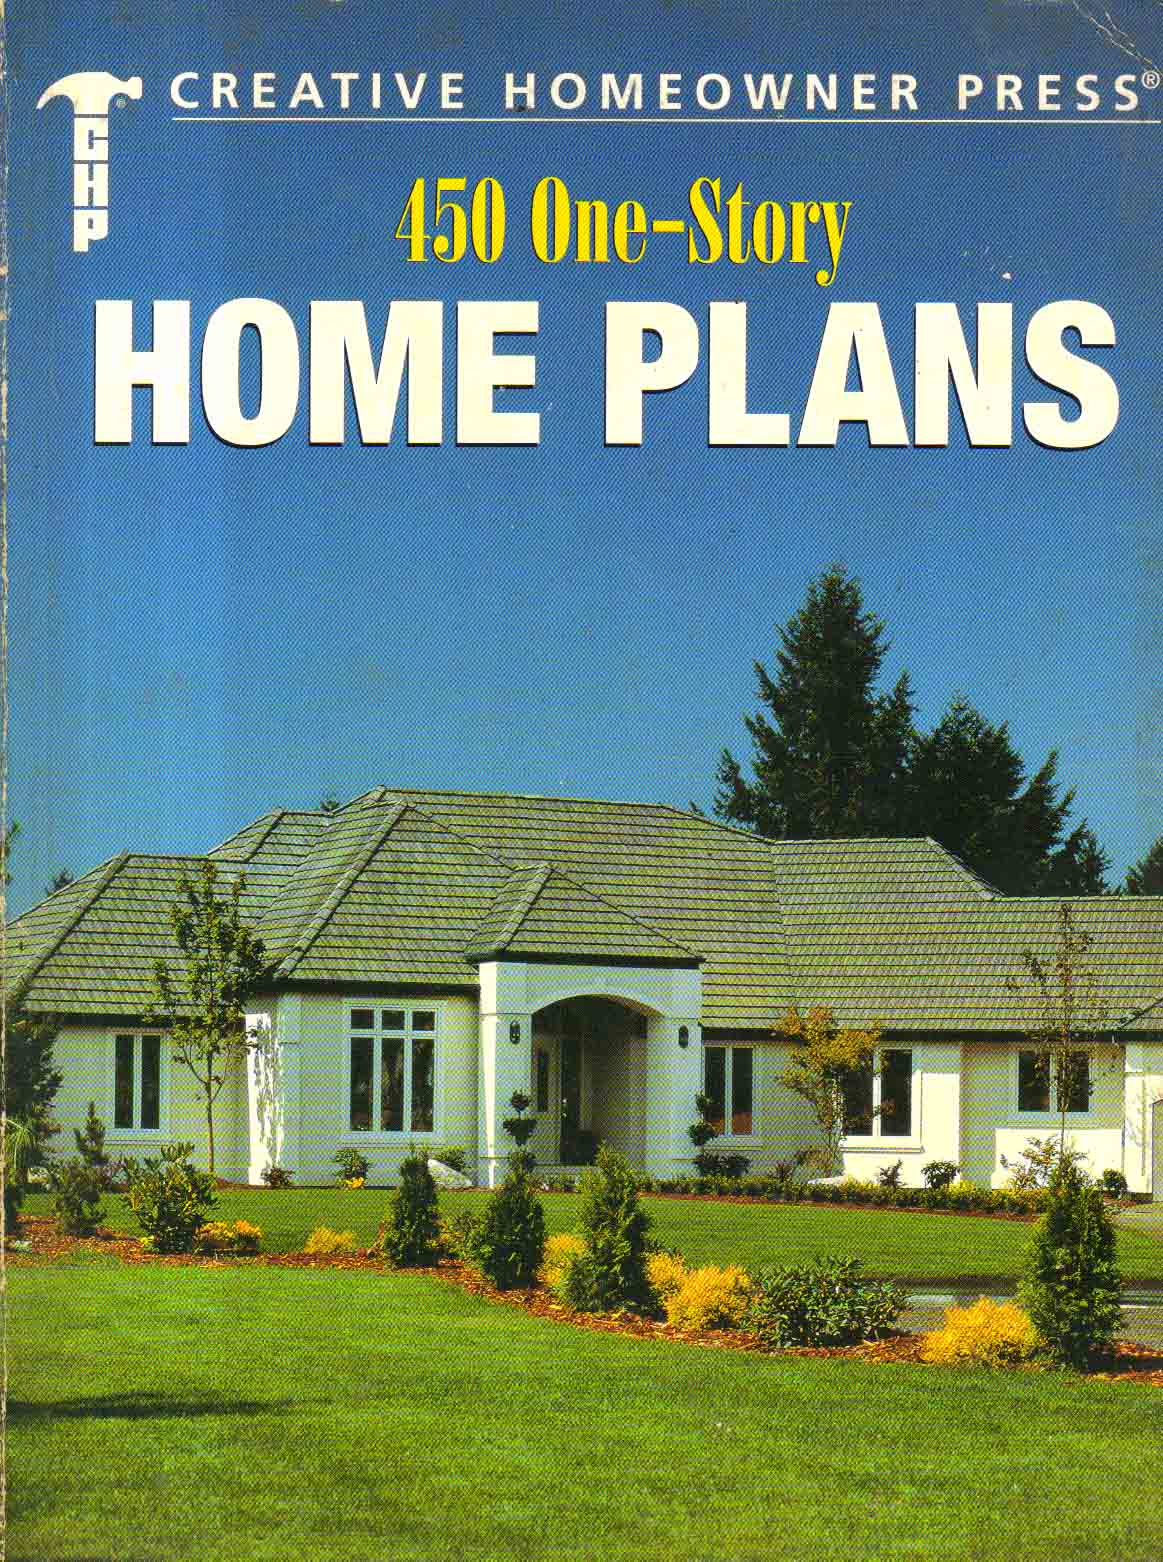 450 one-story Home Plans.